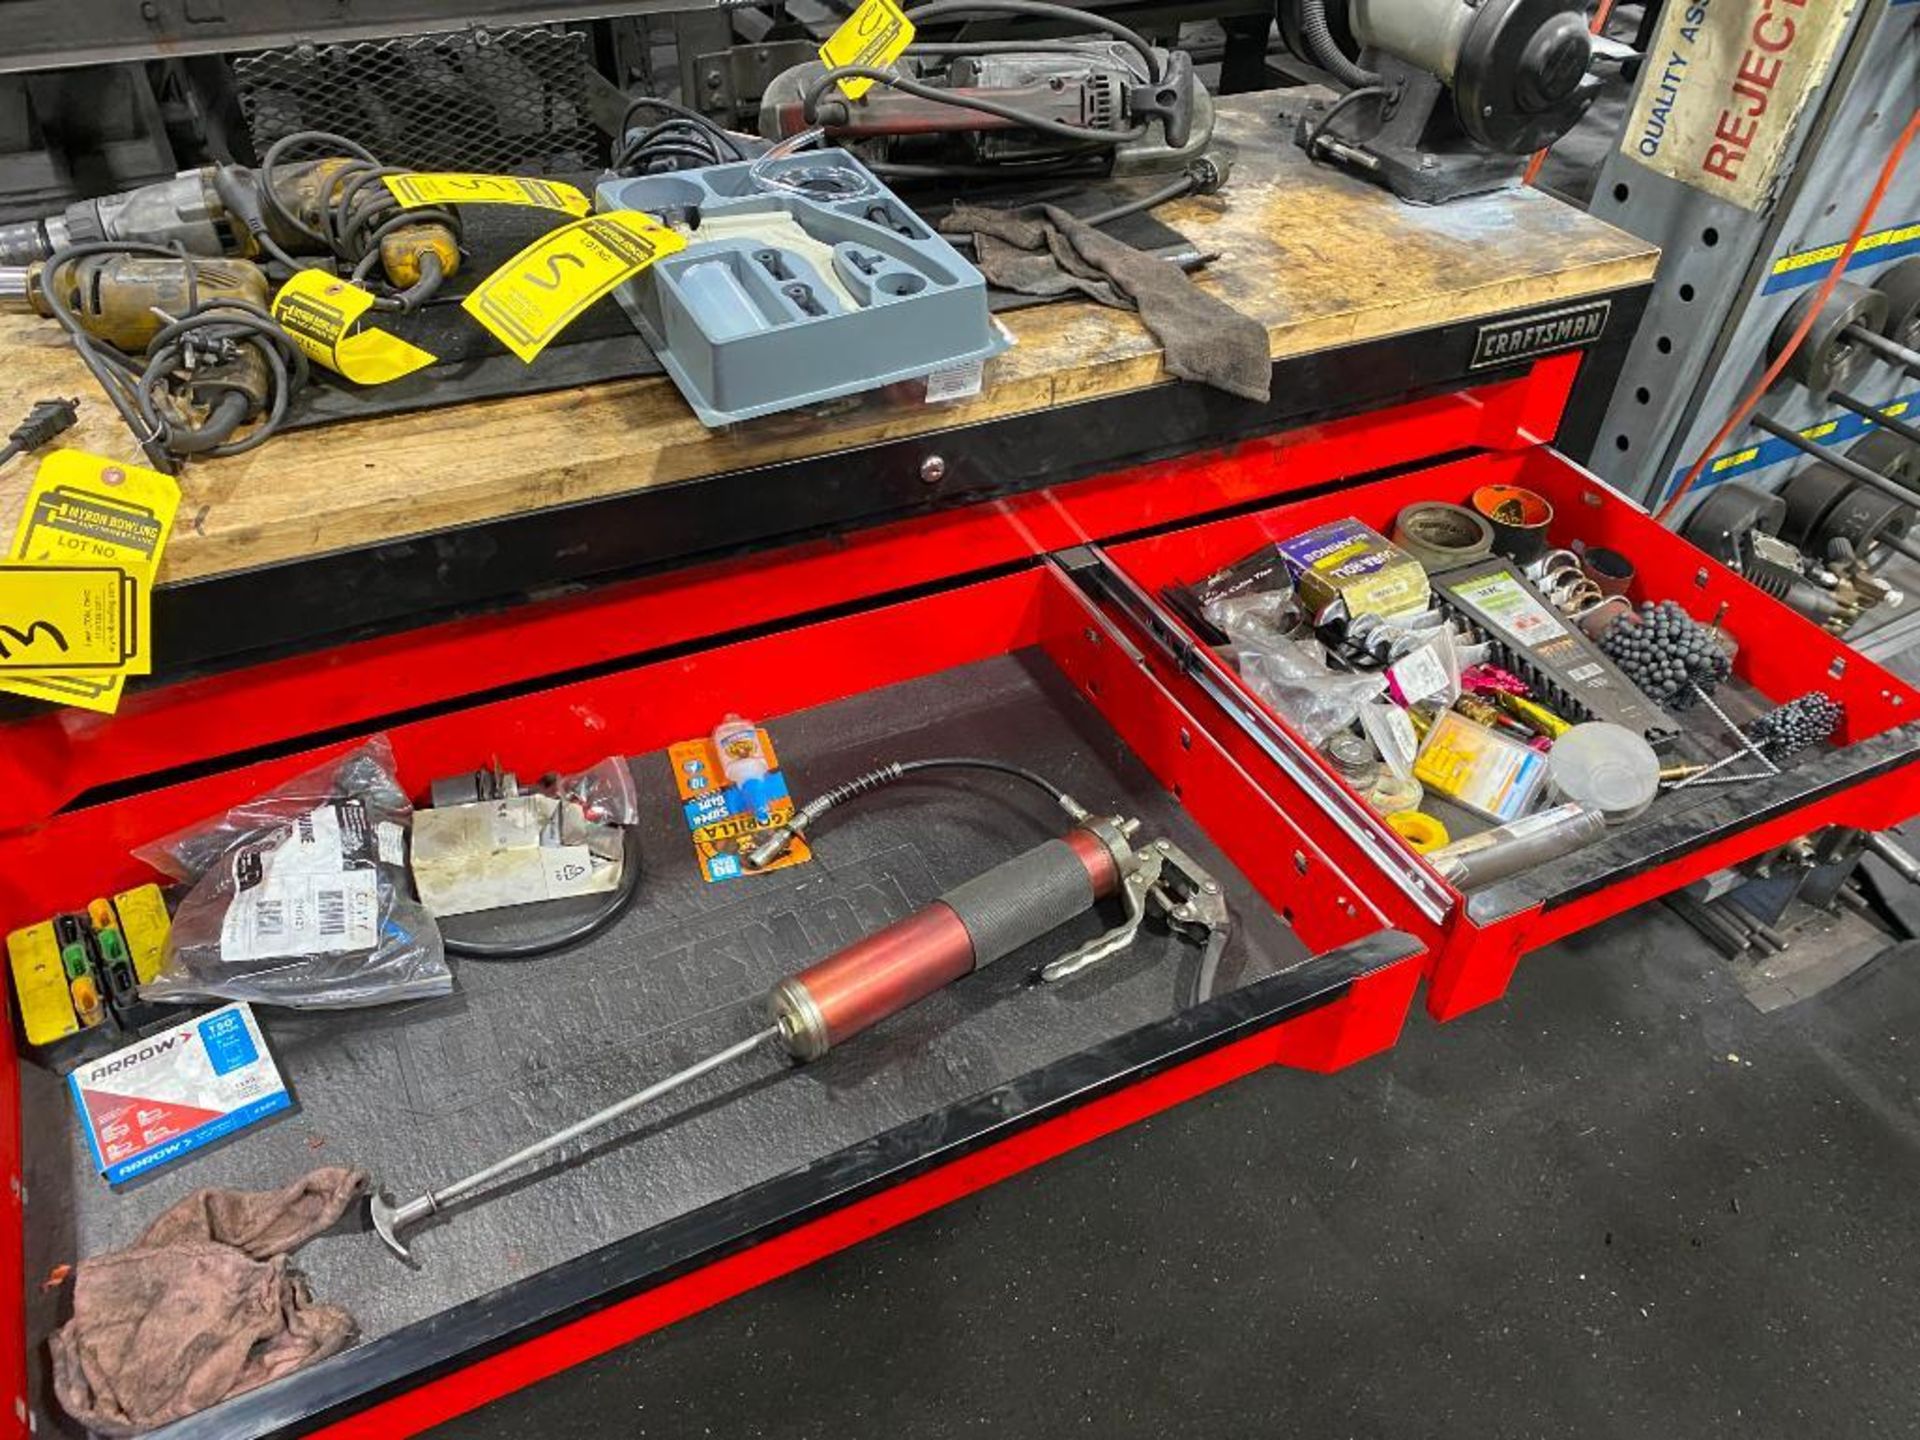 CRAFTSMAN TOOLBOX W/ BENCH GRINDER, WILTON VISE, COMBINATION WRENCHES, GREASE GUN, AIR HOSE, & SOCKE - Image 3 of 7